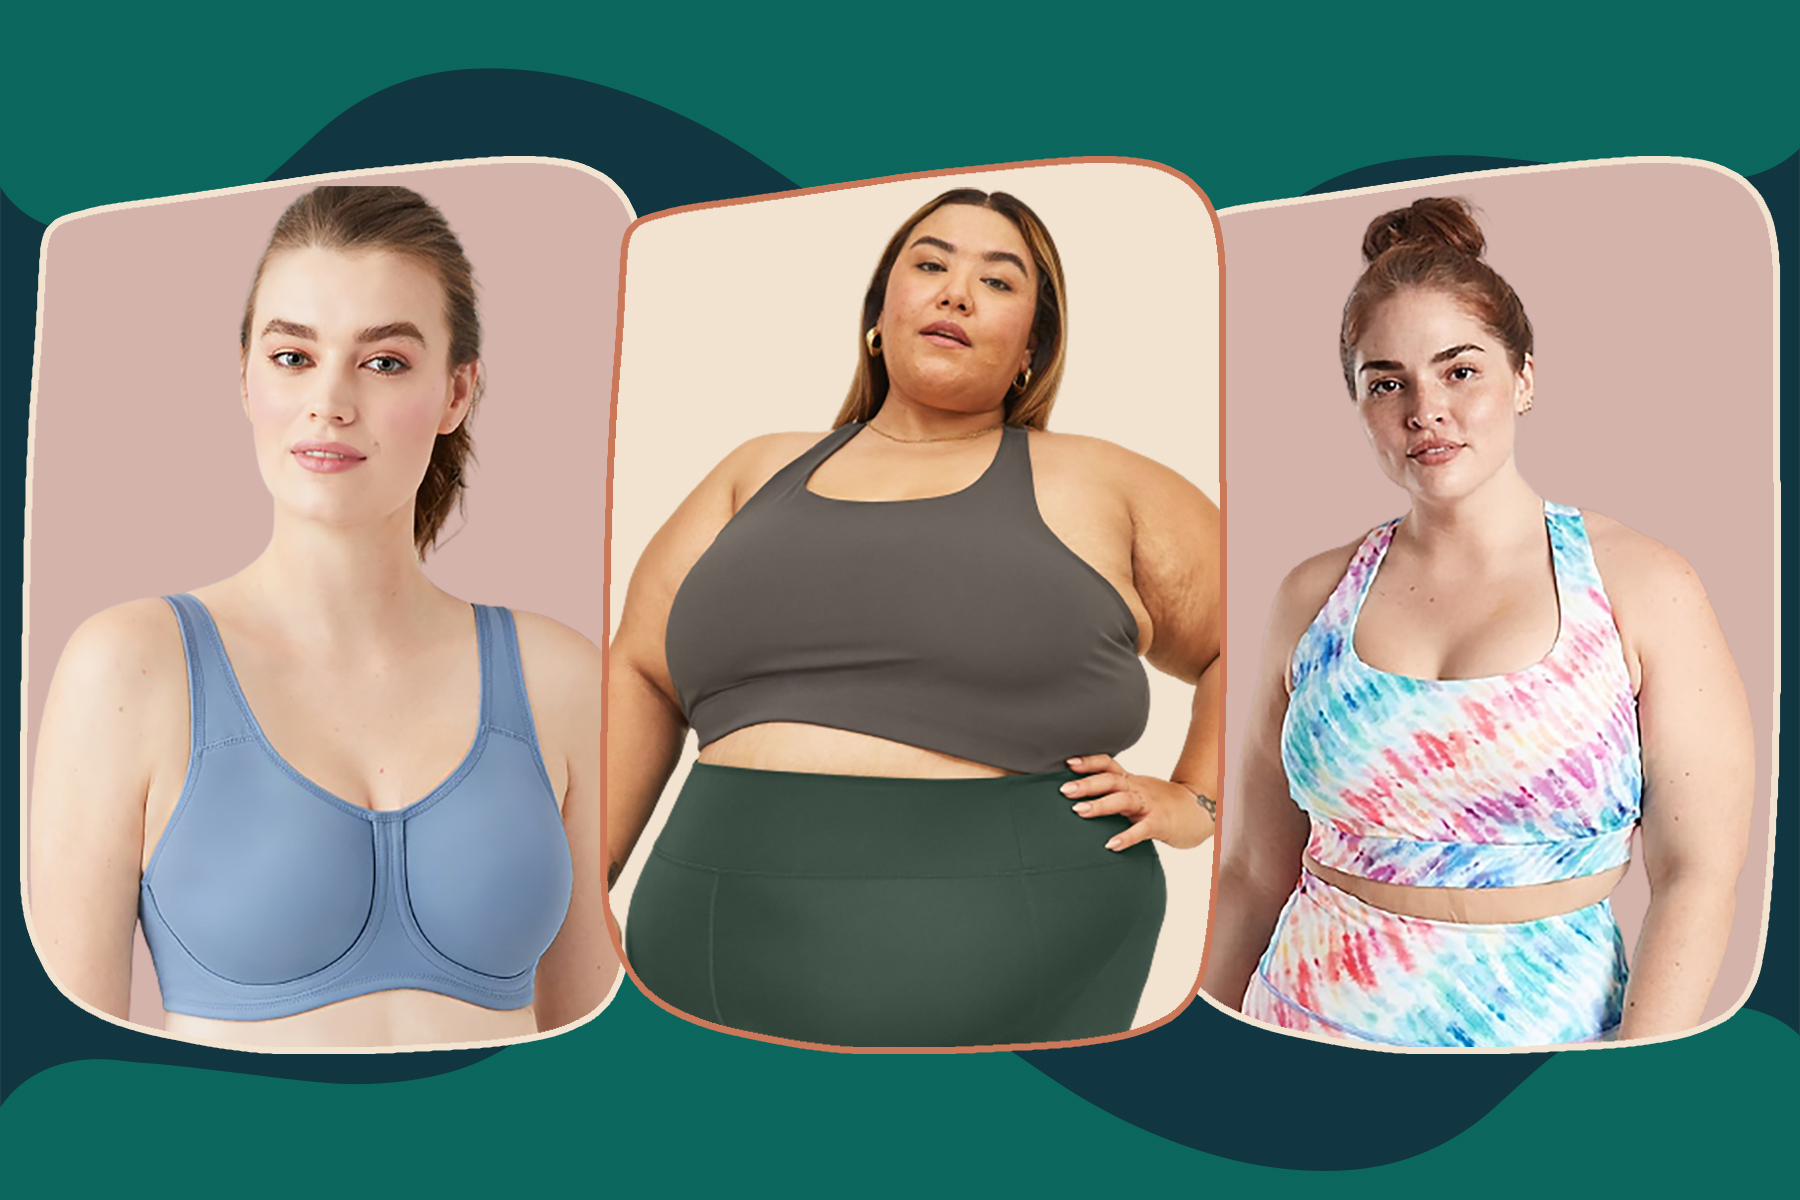 Top 5 Sports Bras for Large or Heavy Breasts - Most Supportive